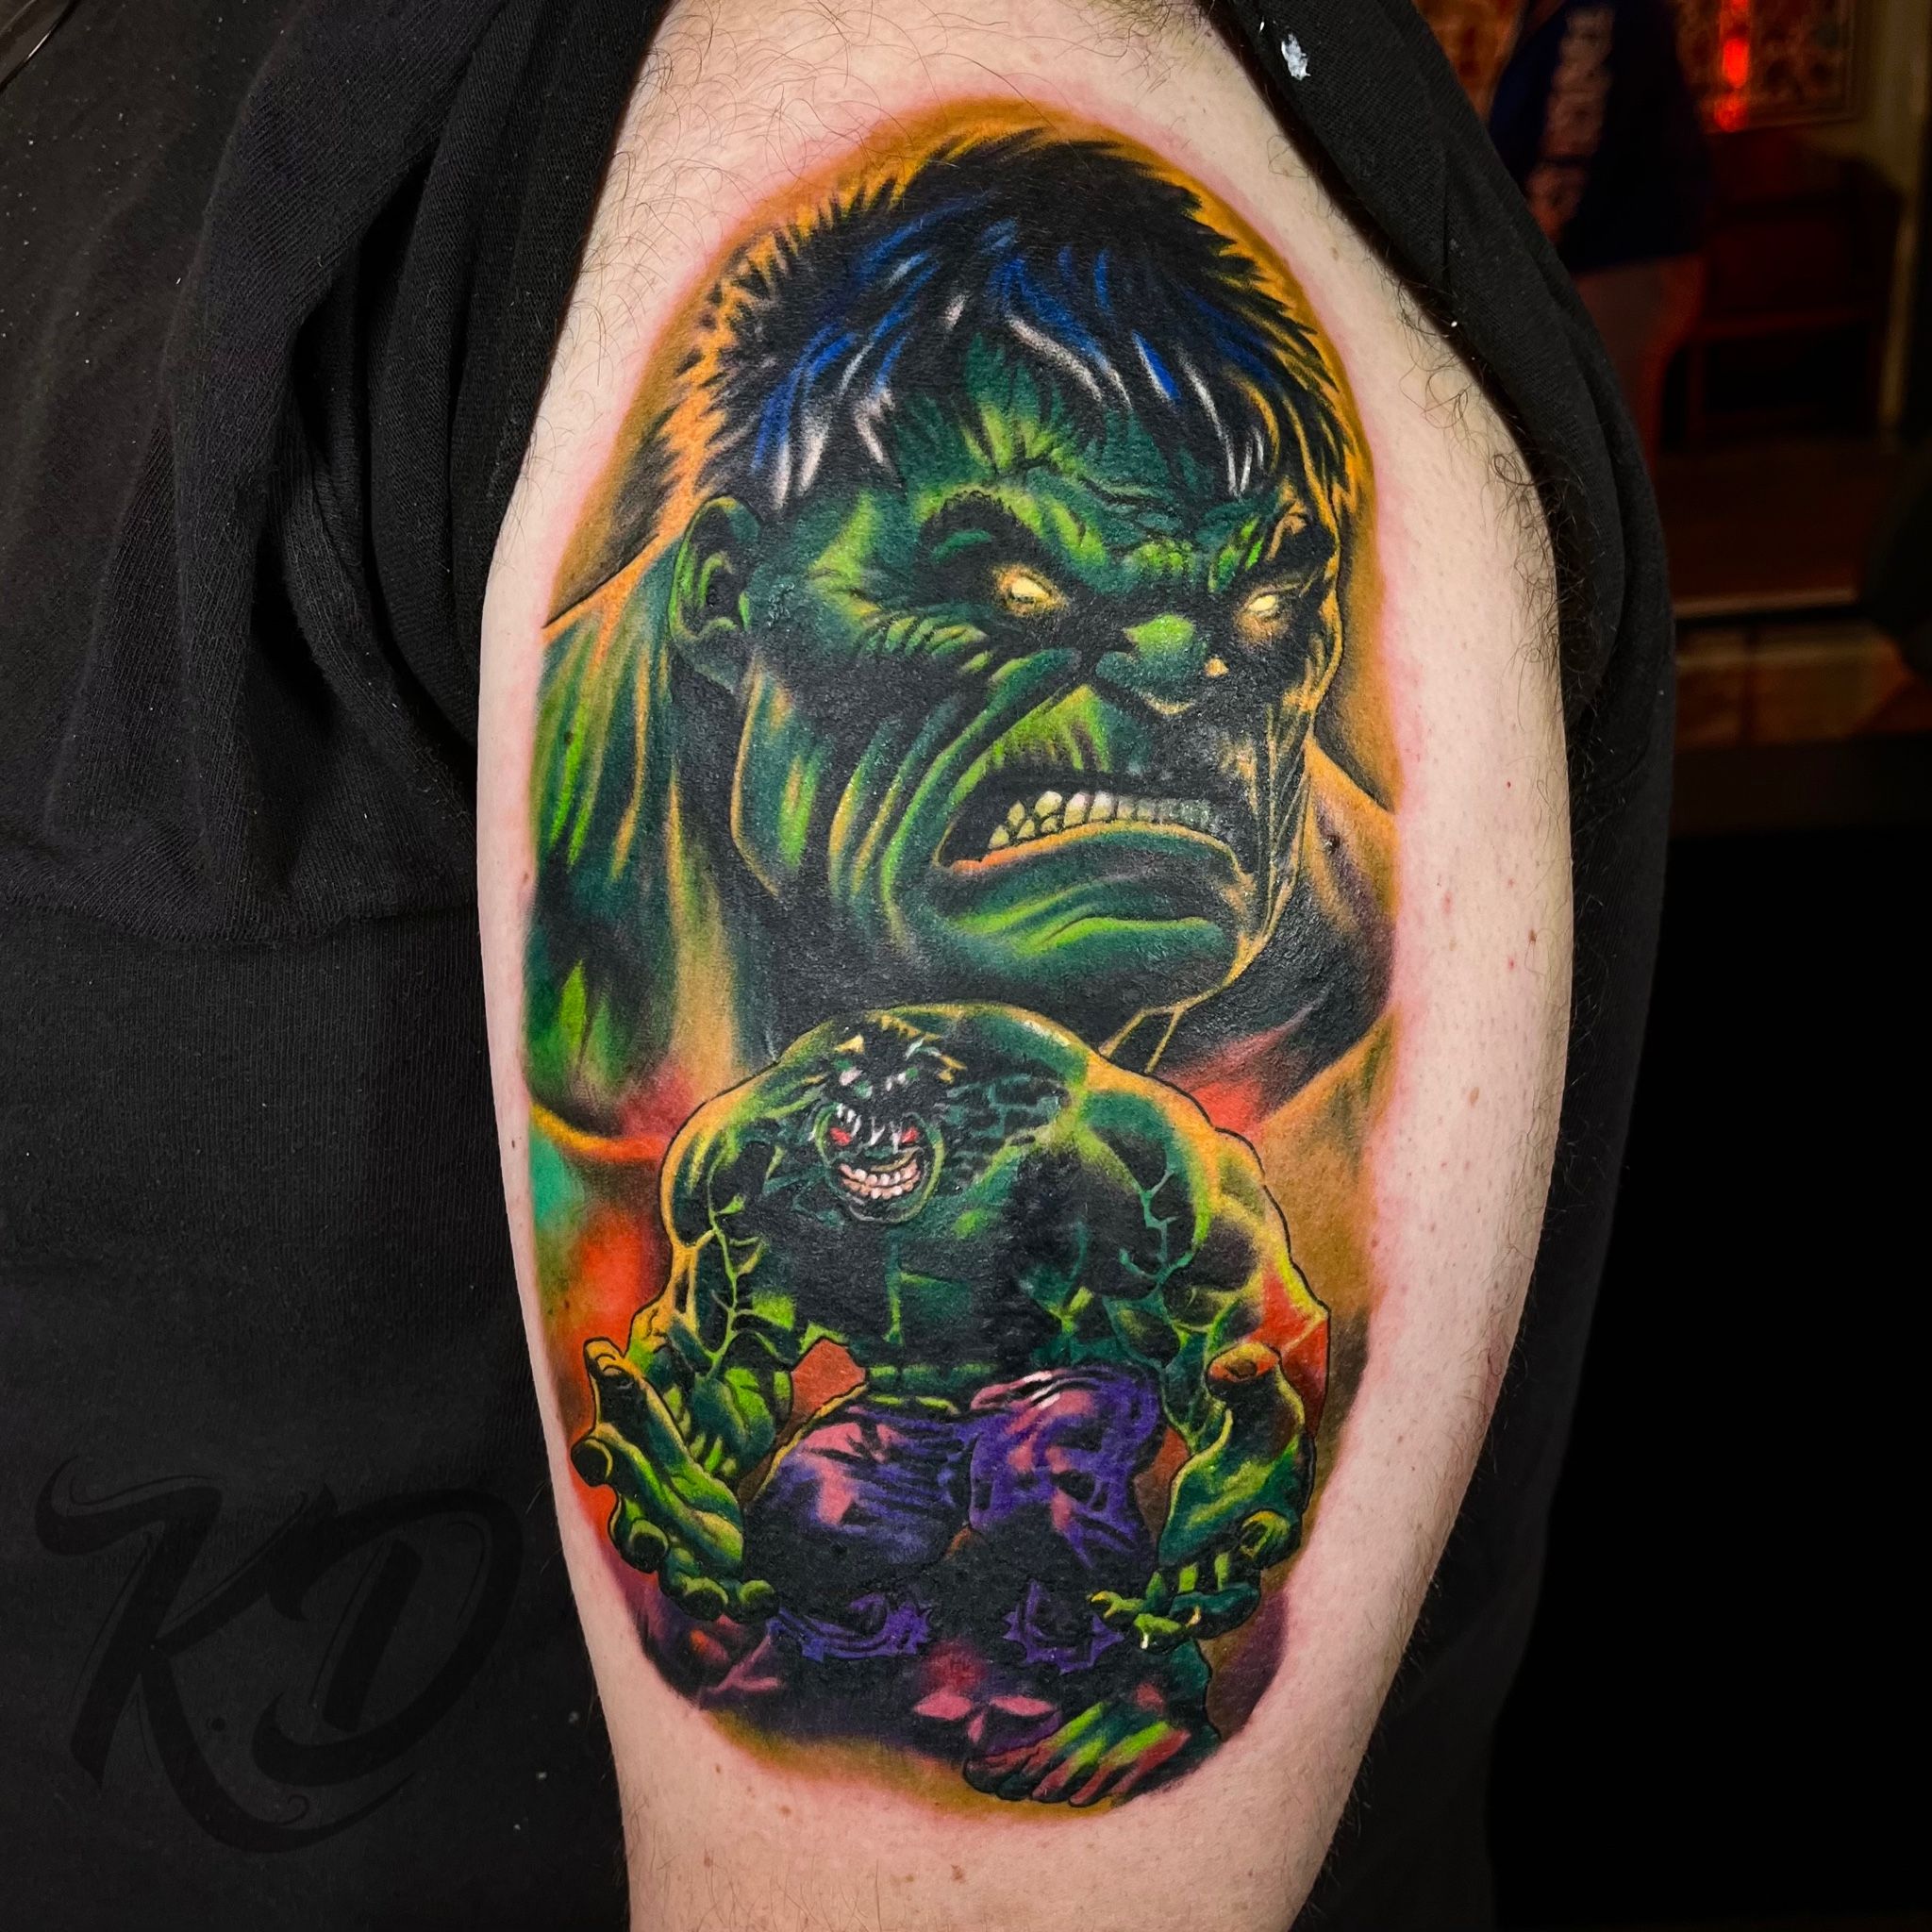 Got a tattoo of one of my favorite characters she hulk Tattoo done by  laceybtattoos  rmarvelstudios